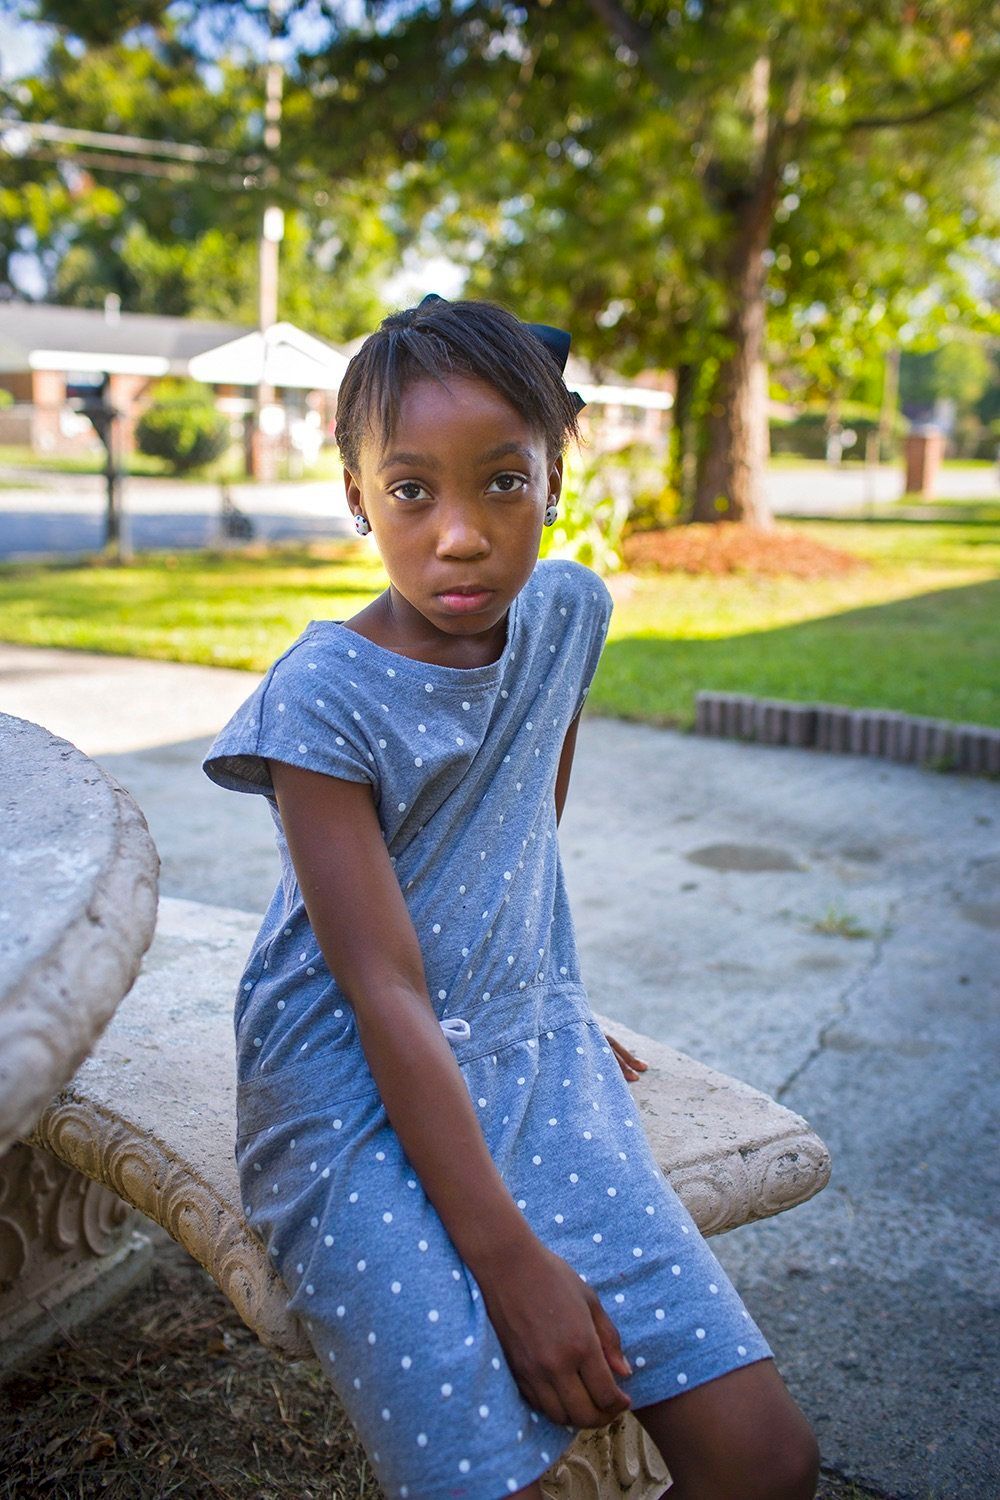 Eight-year-old Taniya was shot by another third-grader in their classroom. The boy had found the gun in his home and brought it to school. (Augusta, Georgia, 2015)